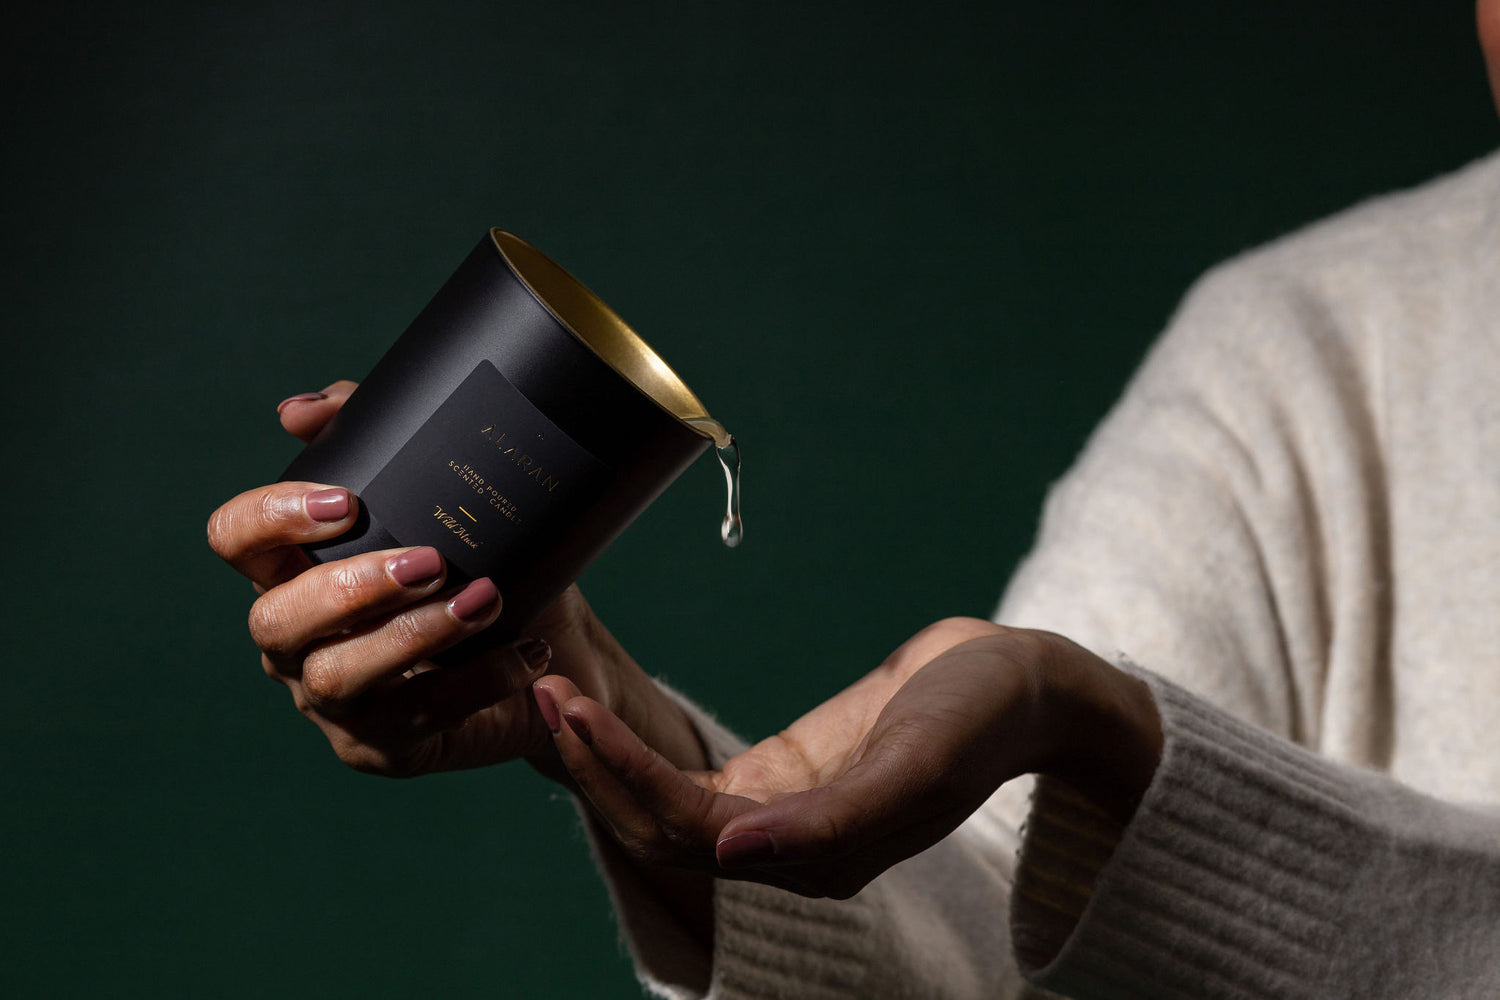 Wild Musk Candle being poured into hand on a dark green background